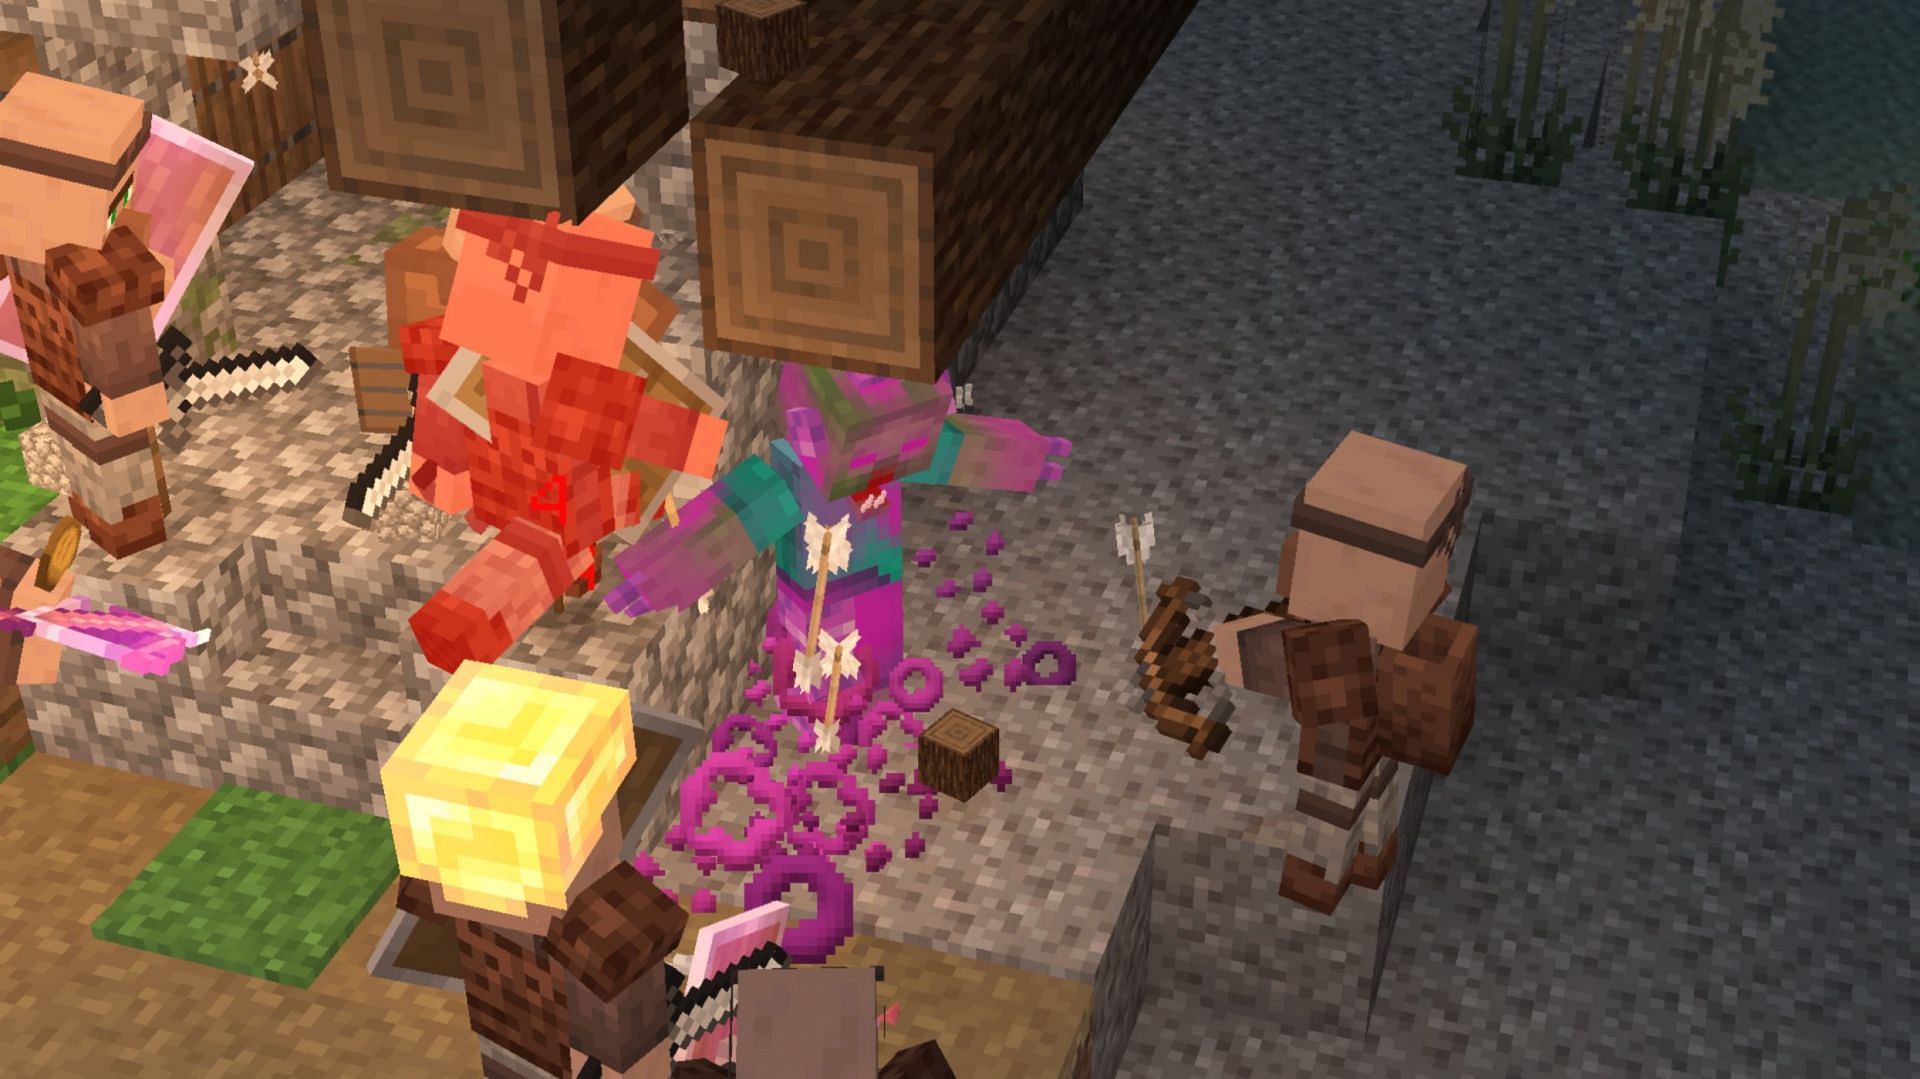 Villagers defending their home from an attacking zombie in Mineshafts &amp; Monsters (Image via Bstylia14/CurseForge)